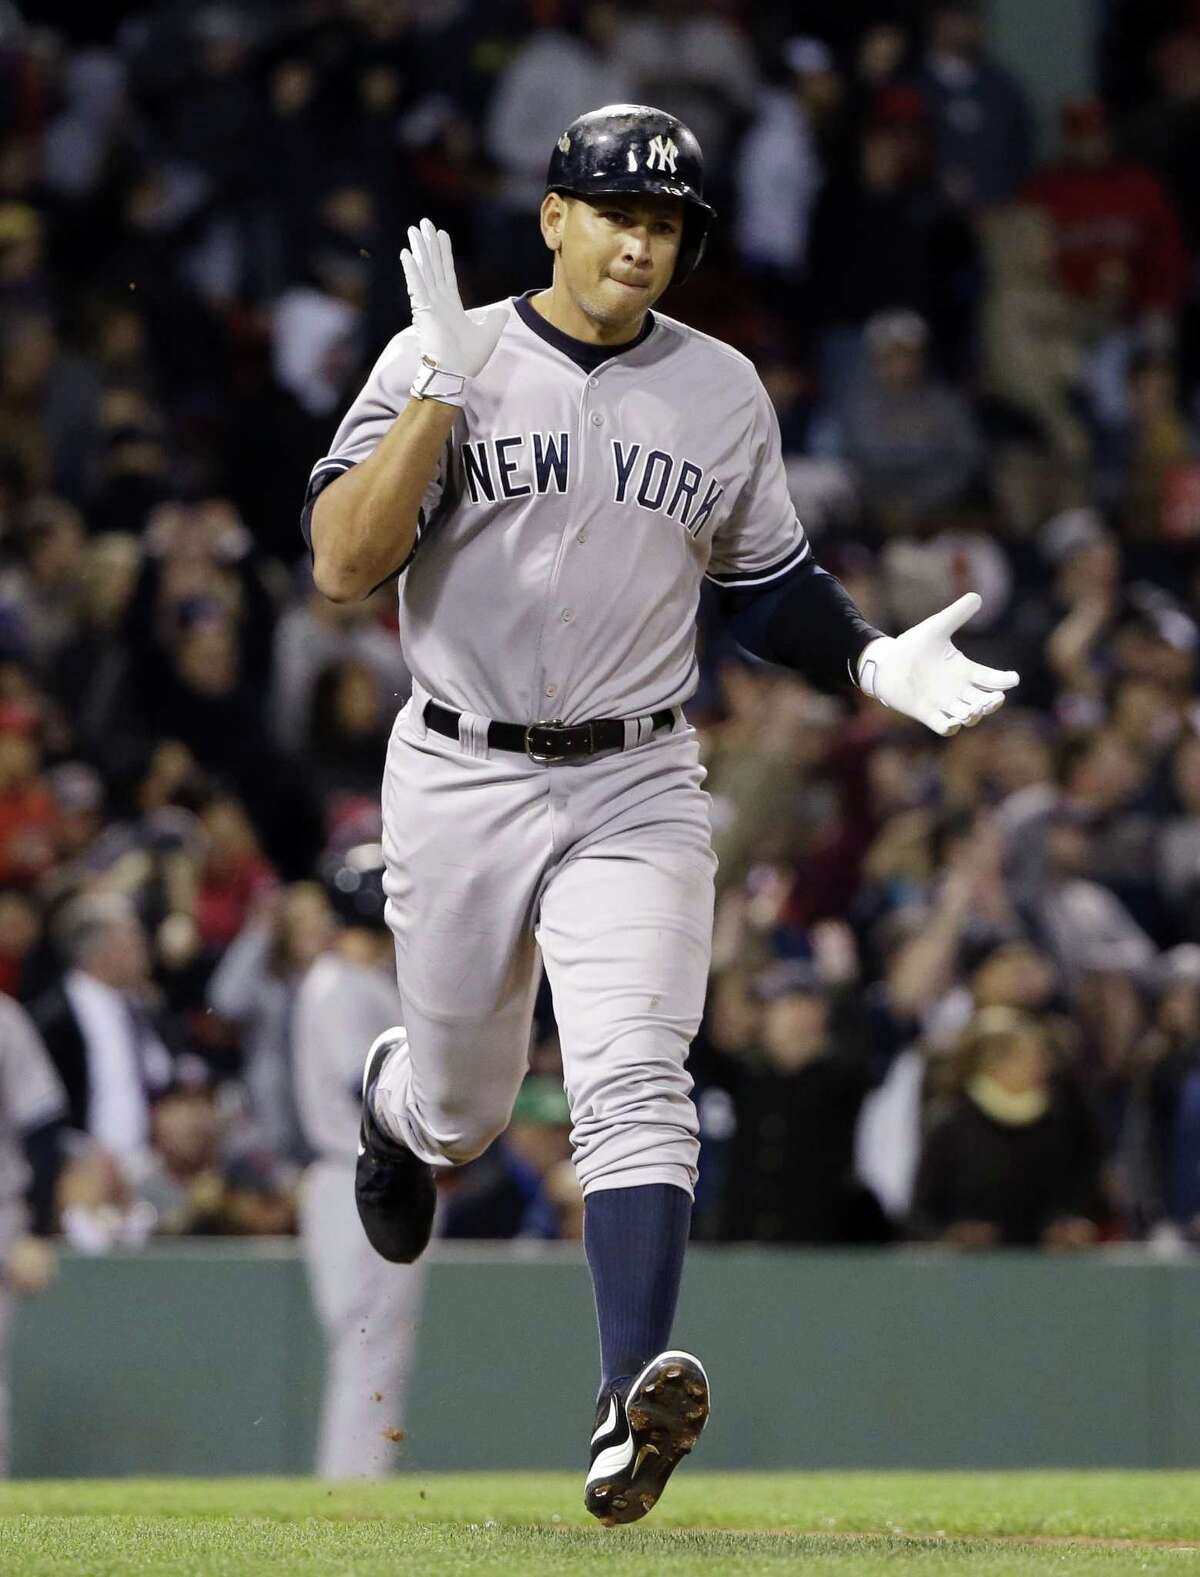 New York Yankees pinch hitter Alex Rodriguez runs to first after hitting a solo homer in the eighth inning of a baseball game against the Boston Red Sox at Fenway Park in Boston, Friday, May 1, 2015. Rodriguez has now tied slugger Willie Mays with 660 career home runs. (AP Photo/Elise Amendola)